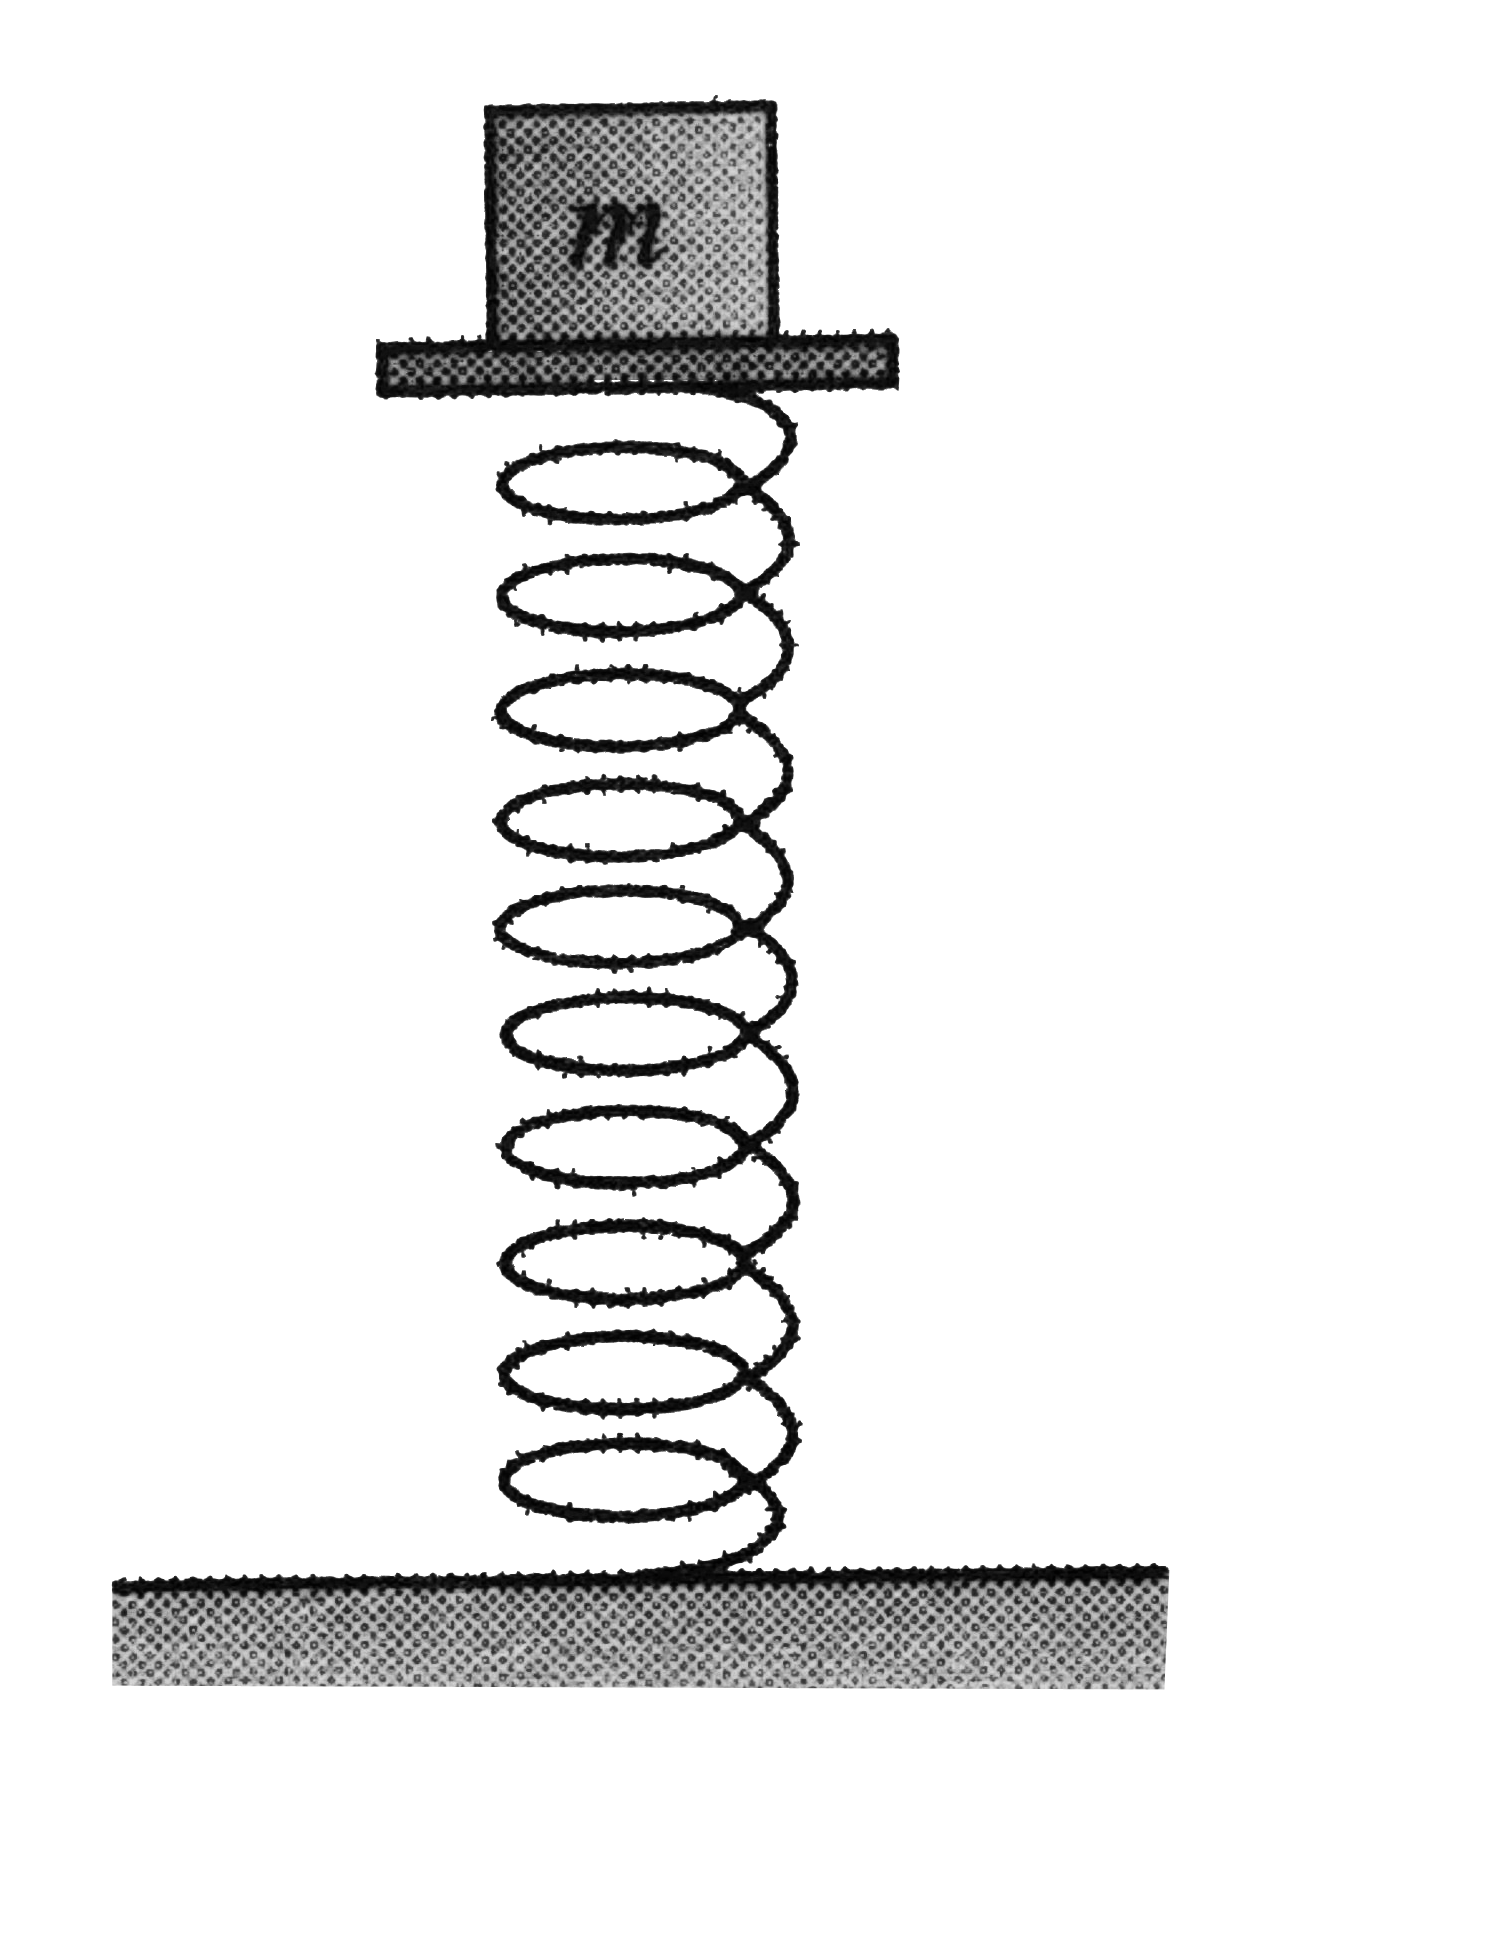 A block of mass m is suddenly released from the top of a spring of stiffness constant k.      a. Find the acceleration of block just after release.   b. What is the compression in the spring at equilibrium.   c. What is the maximum compression in the spring.   d. Find the acceleration of block at maximum compression in the spring.